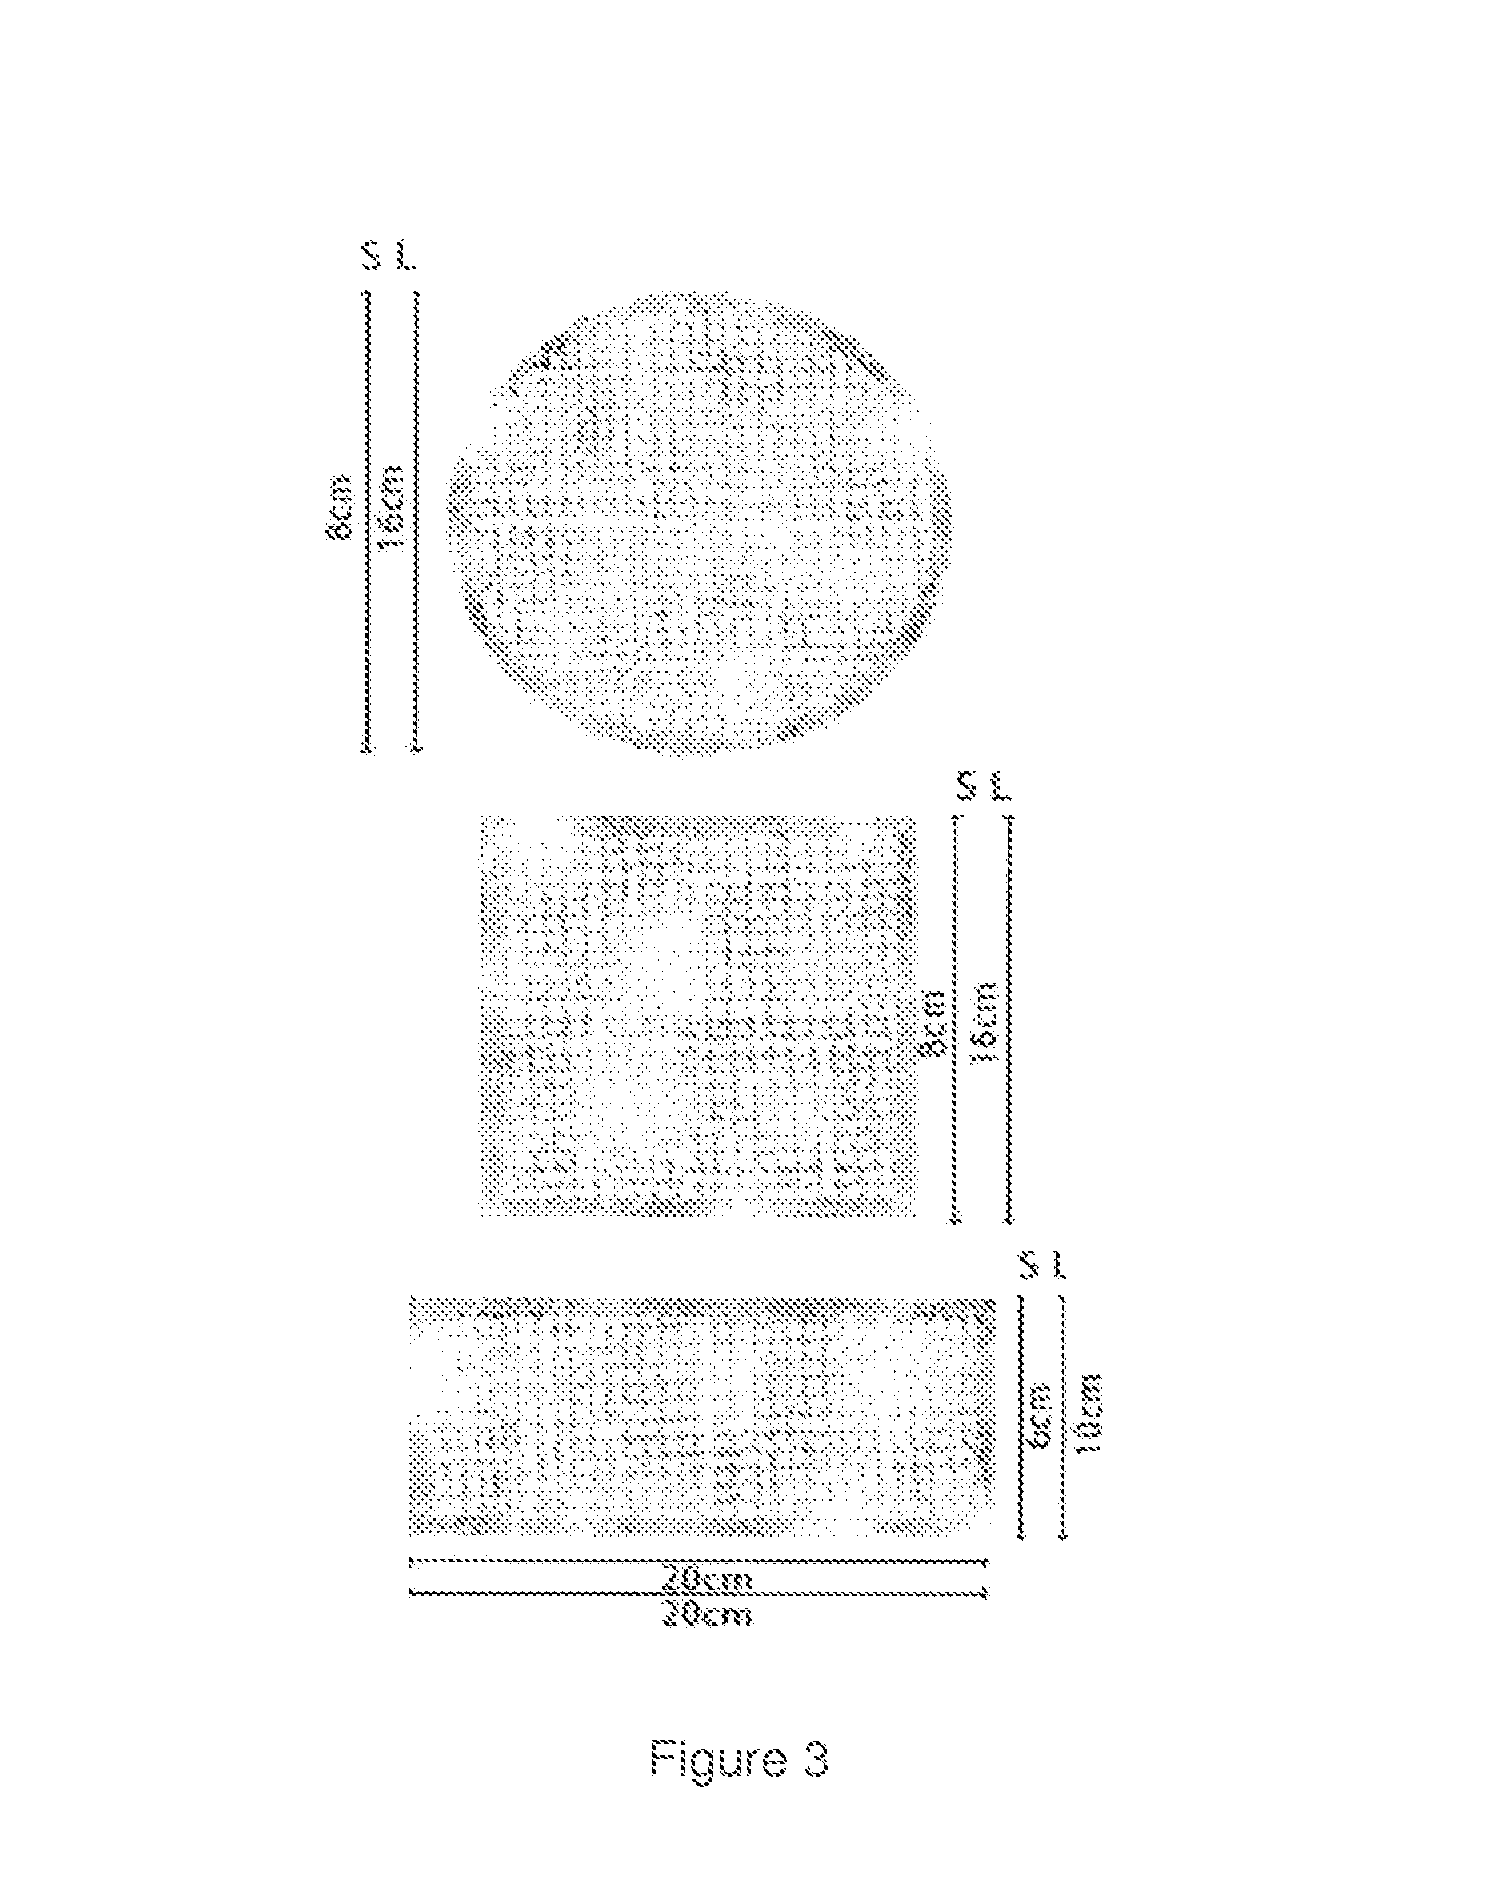 Pharmaceutical composition and device for preventing, treating and curing ulcers on a diabetic foot and other wounds, which includes snail slime from the species <i>Cryptophalus aspersus </i>or <i>Helix aspersa muller </i>and pharmaceutically acceptable carriers and/or additives